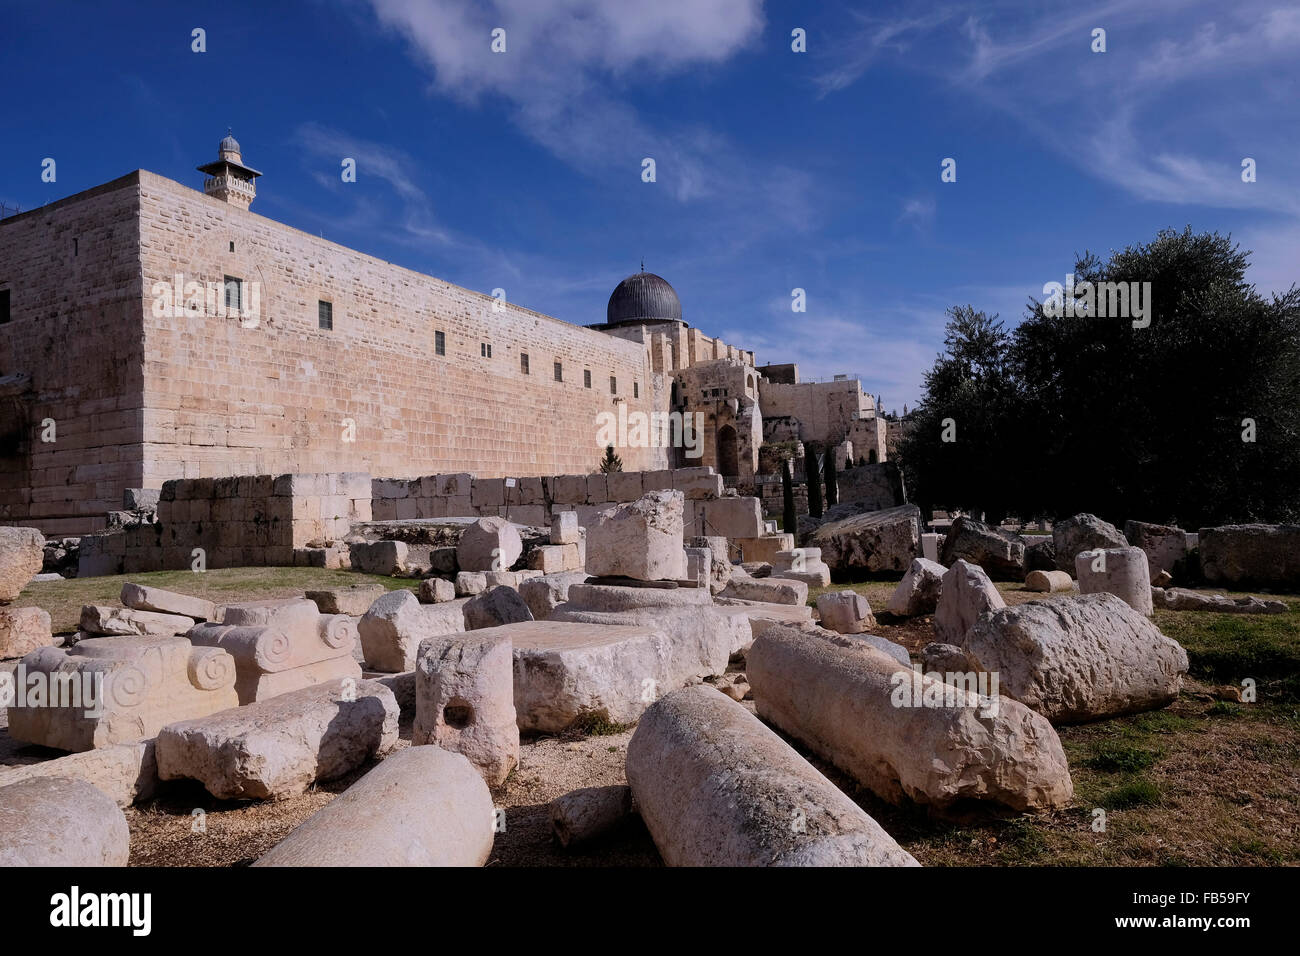 Fallen columns and collapsed walls of Islamic buildings destroyed in the earthquake of 749 C.E lie scattered just outside the Al Aqsa compound in the Old City of Jerusalem. Israel. Stock Photo